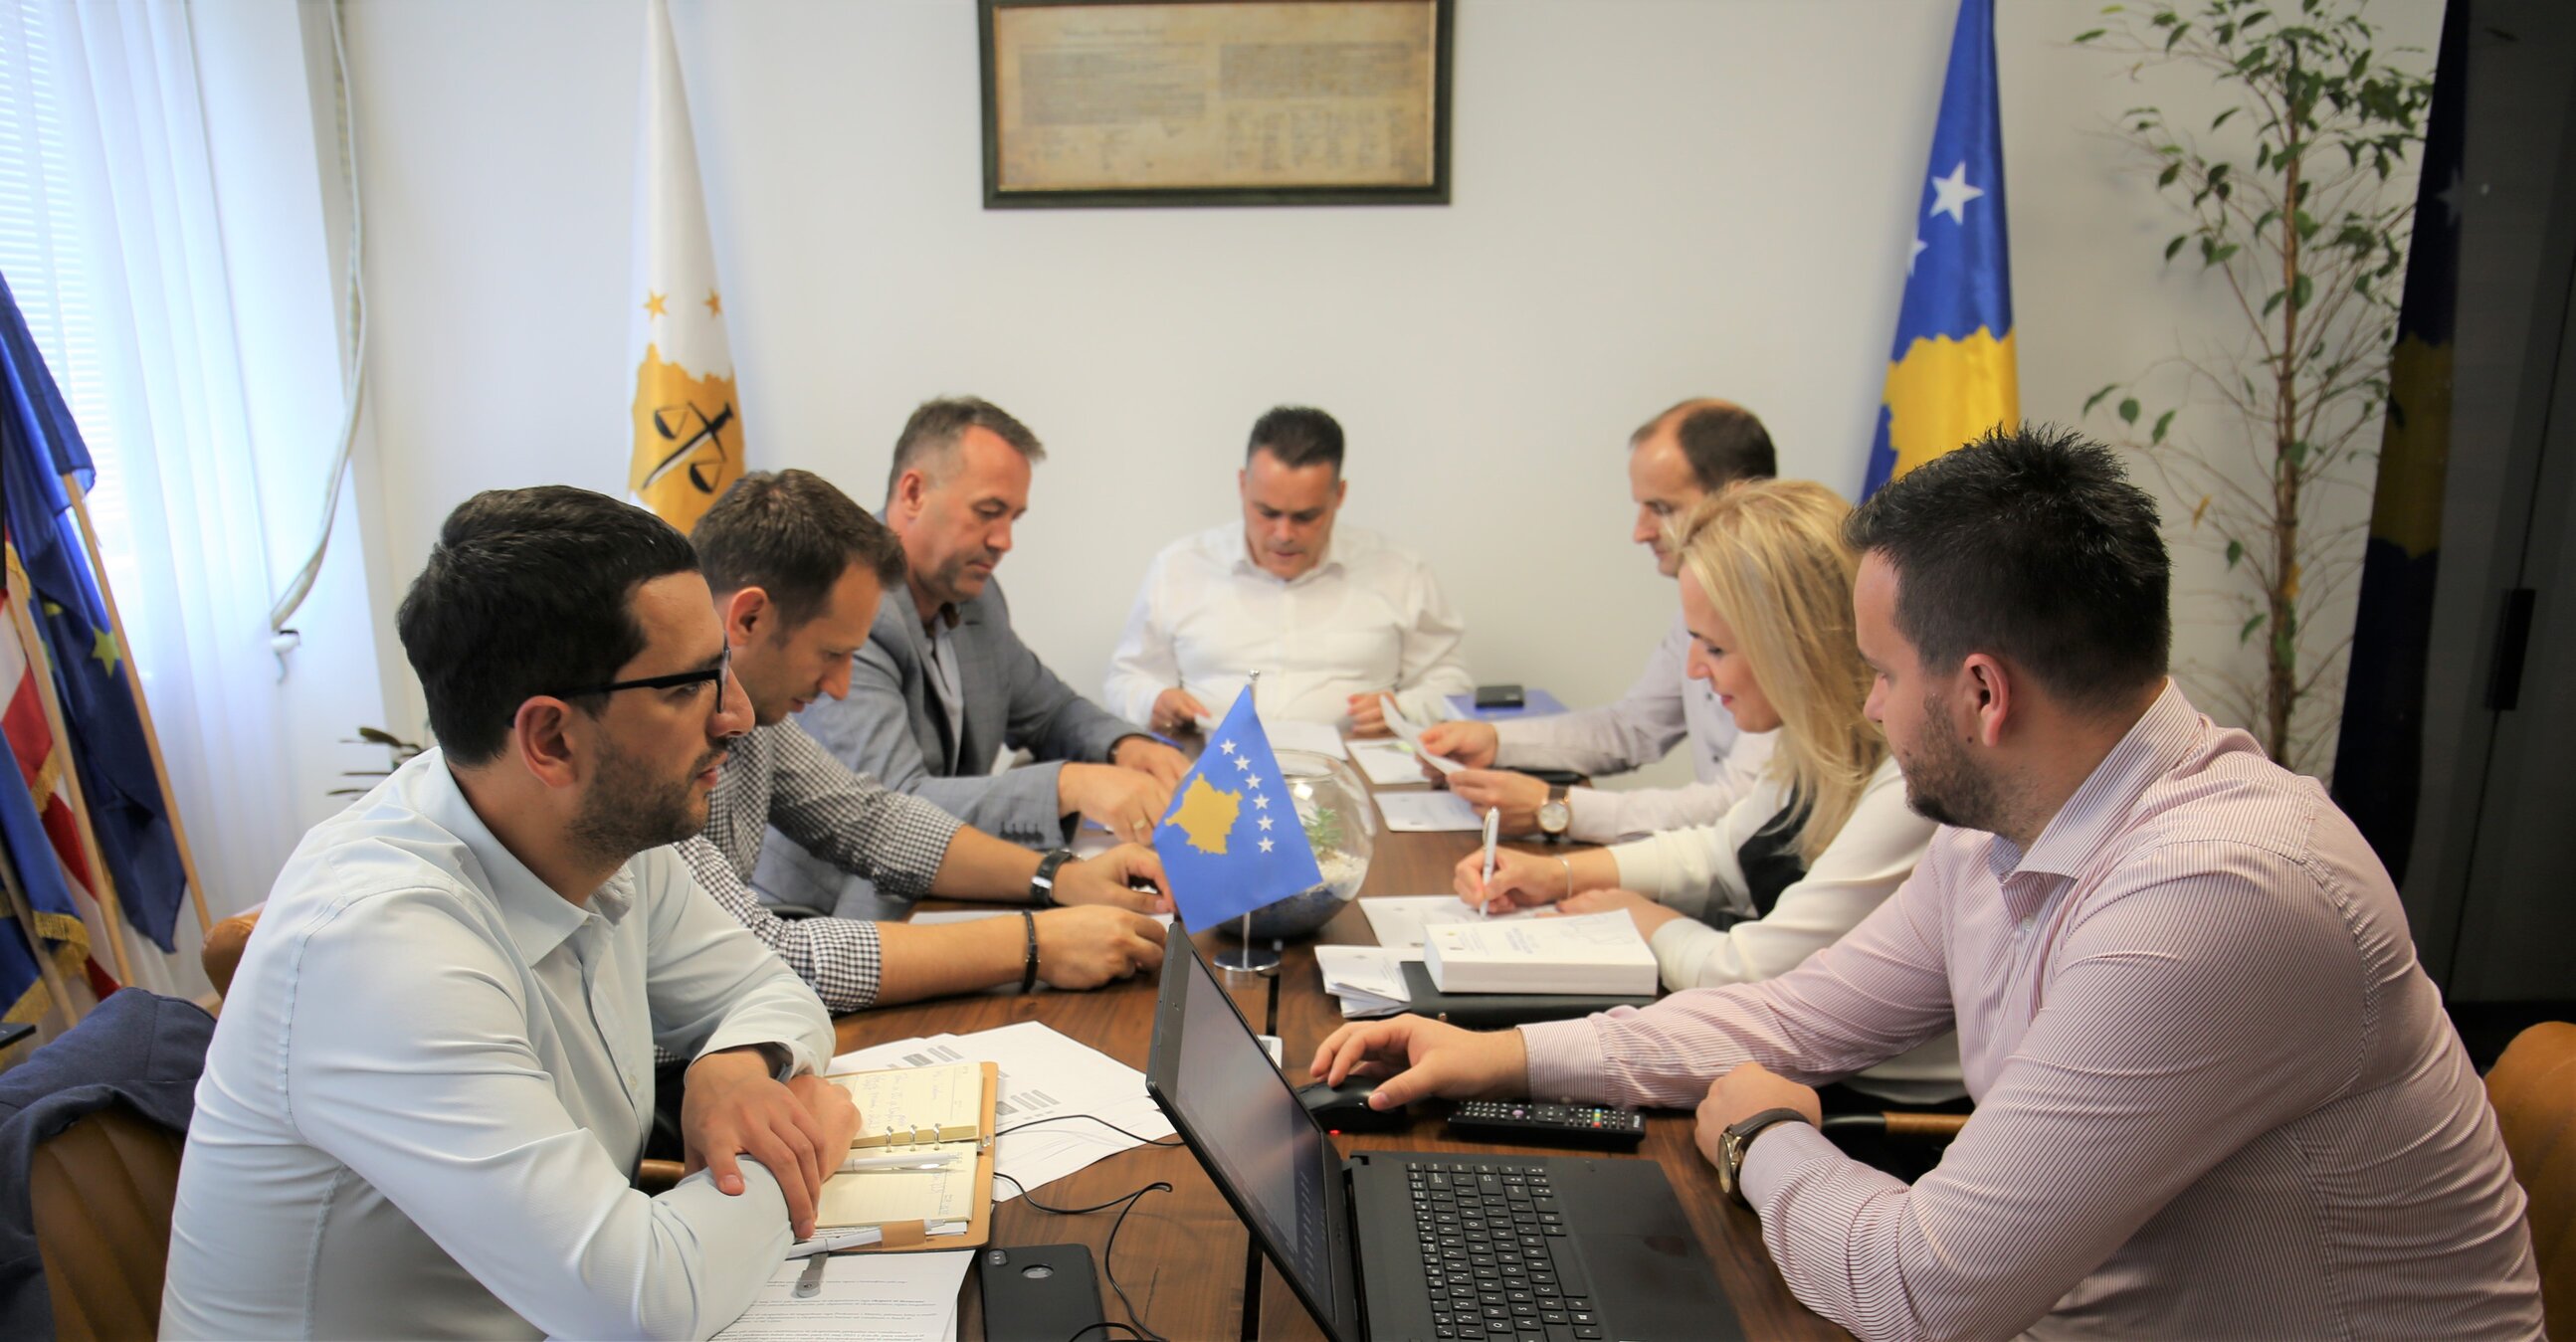 The next meeting of the Committee on Normative Issues is held